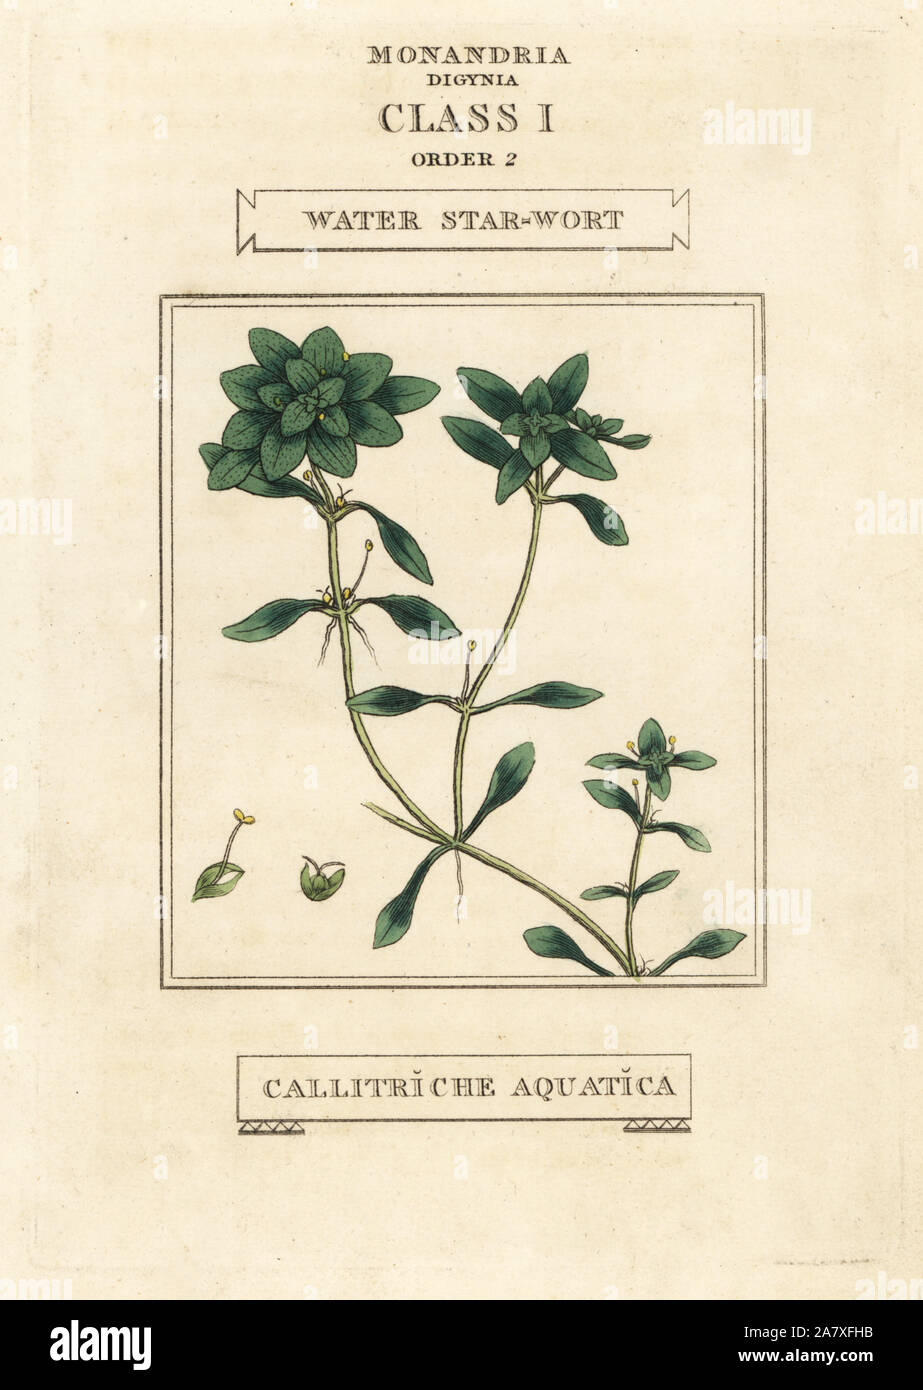 Water starwort, Callitriche palustris (Callitriche aquatica). Handcoloured copperplate engraving after an illustration by Richard Duppa from his The Classes and Orders of the Linnaean System of Botany, Longman, Hurst, London, 1816. Stock Photo